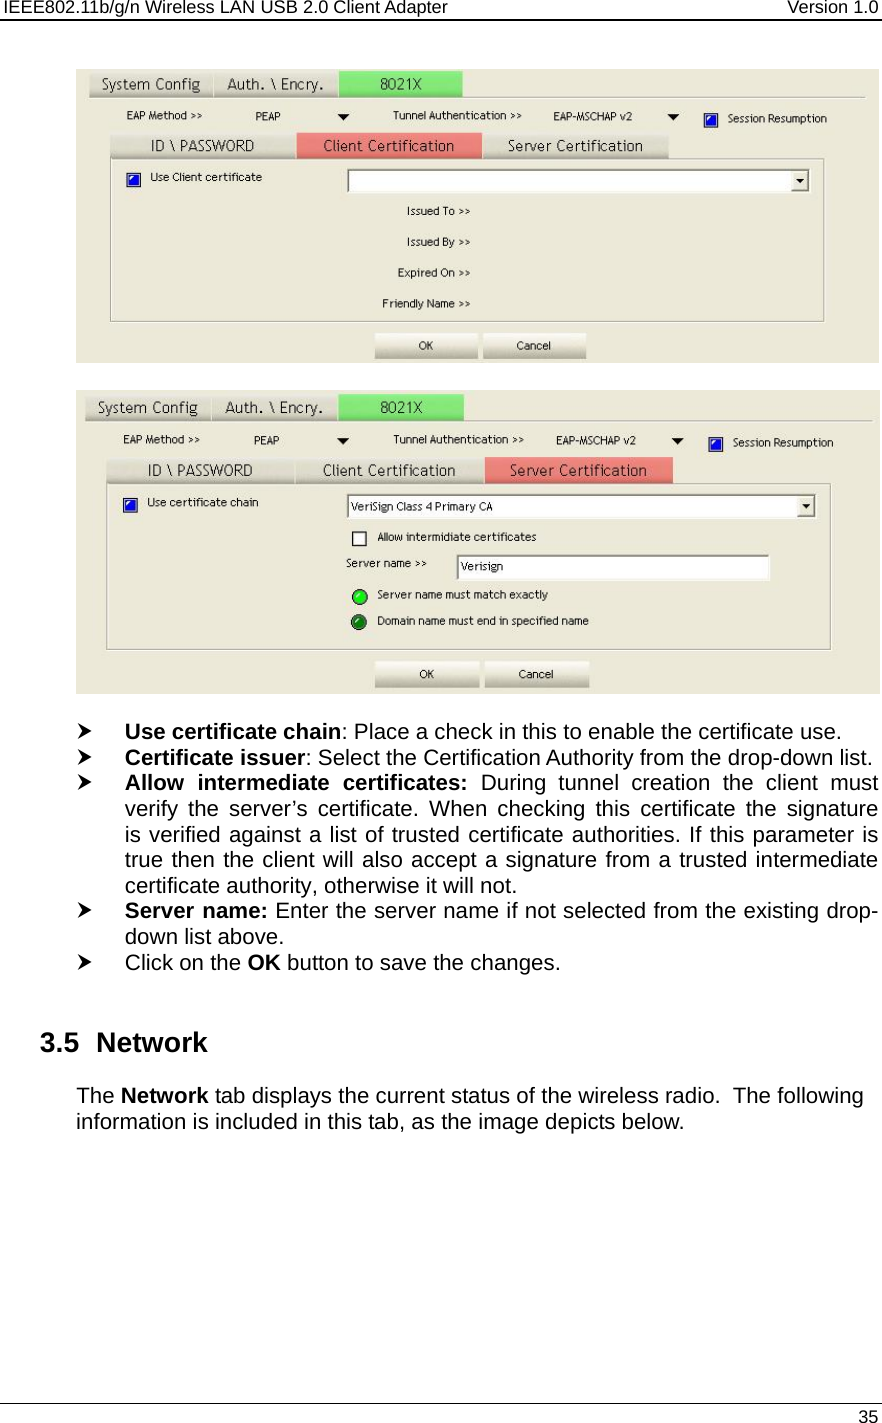 IEEE802.11b/g/n Wireless LAN USB 2.0 Client Adapter  Version 1.0   35      h Use certificate chain: Place a check in this to enable the certificate use.  h Certificate issuer: Select the Certification Authority from the drop-down list.  h Allow intermediate certificates: During tunnel creation the client must verify the server’s certificate. When checking this certificate the signature is verified against a list of trusted certificate authorities. If this parameter is true then the client will also accept a signature from a trusted intermediate certificate authority, otherwise it will not. h Server name: Enter the server name if not selected from the existing drop-down list above.  h Click on the OK button to save the changes.    3.5 Network The Network tab displays the current status of the wireless radio.  The following information is included in this tab, as the image depicts below.  